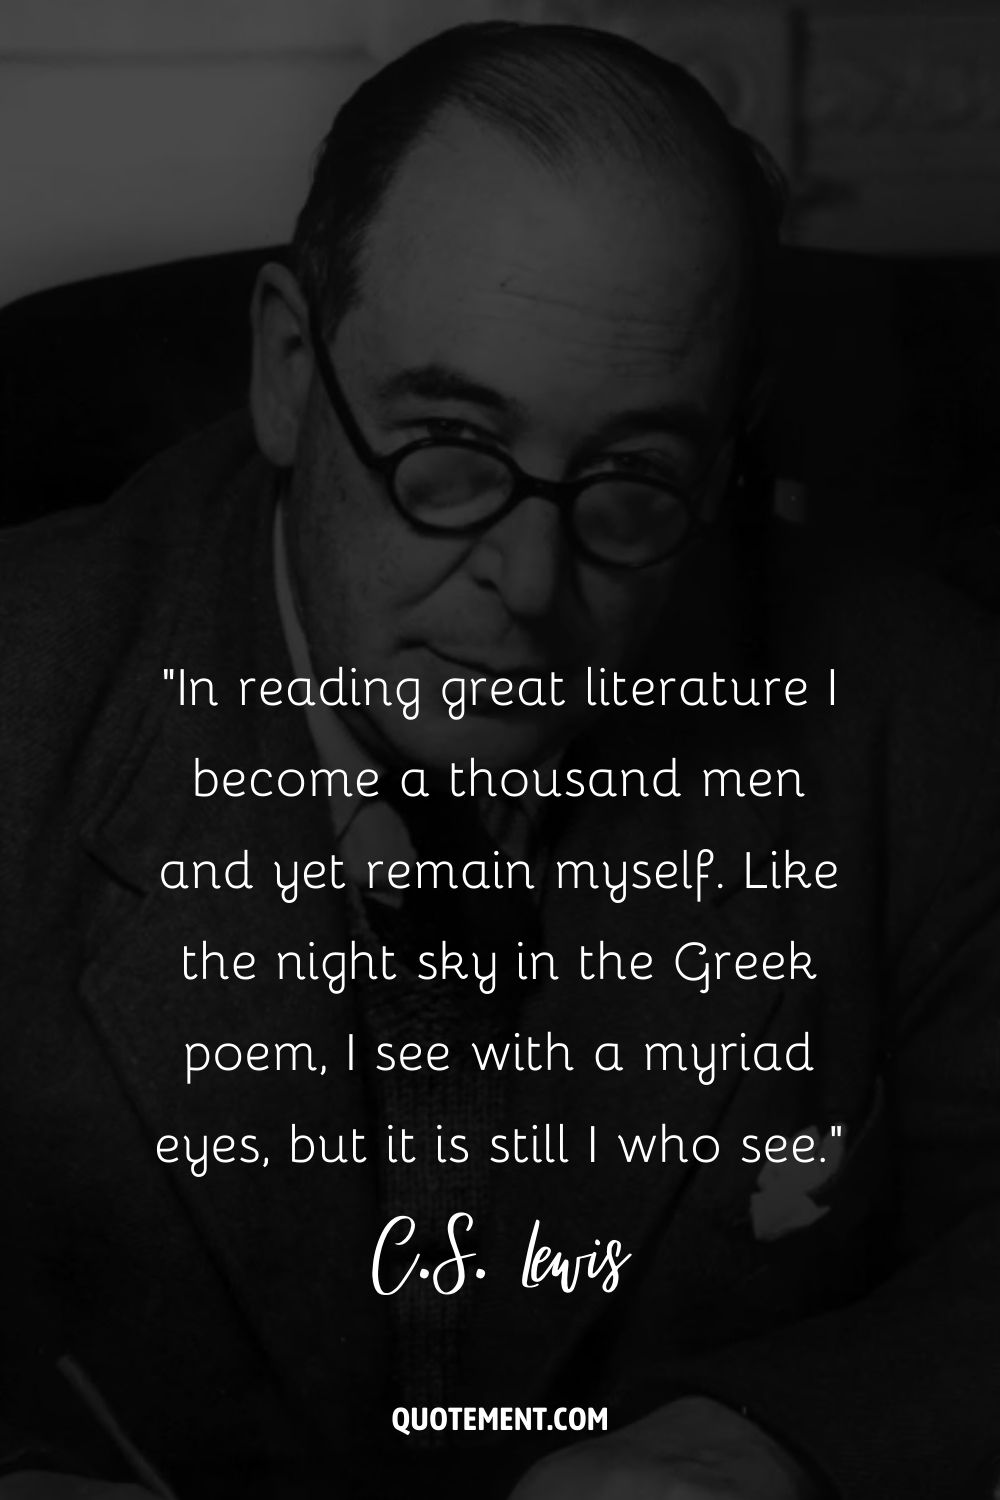 C.S. Lewis sits in thoughtful pose, pen in hand and glasses on